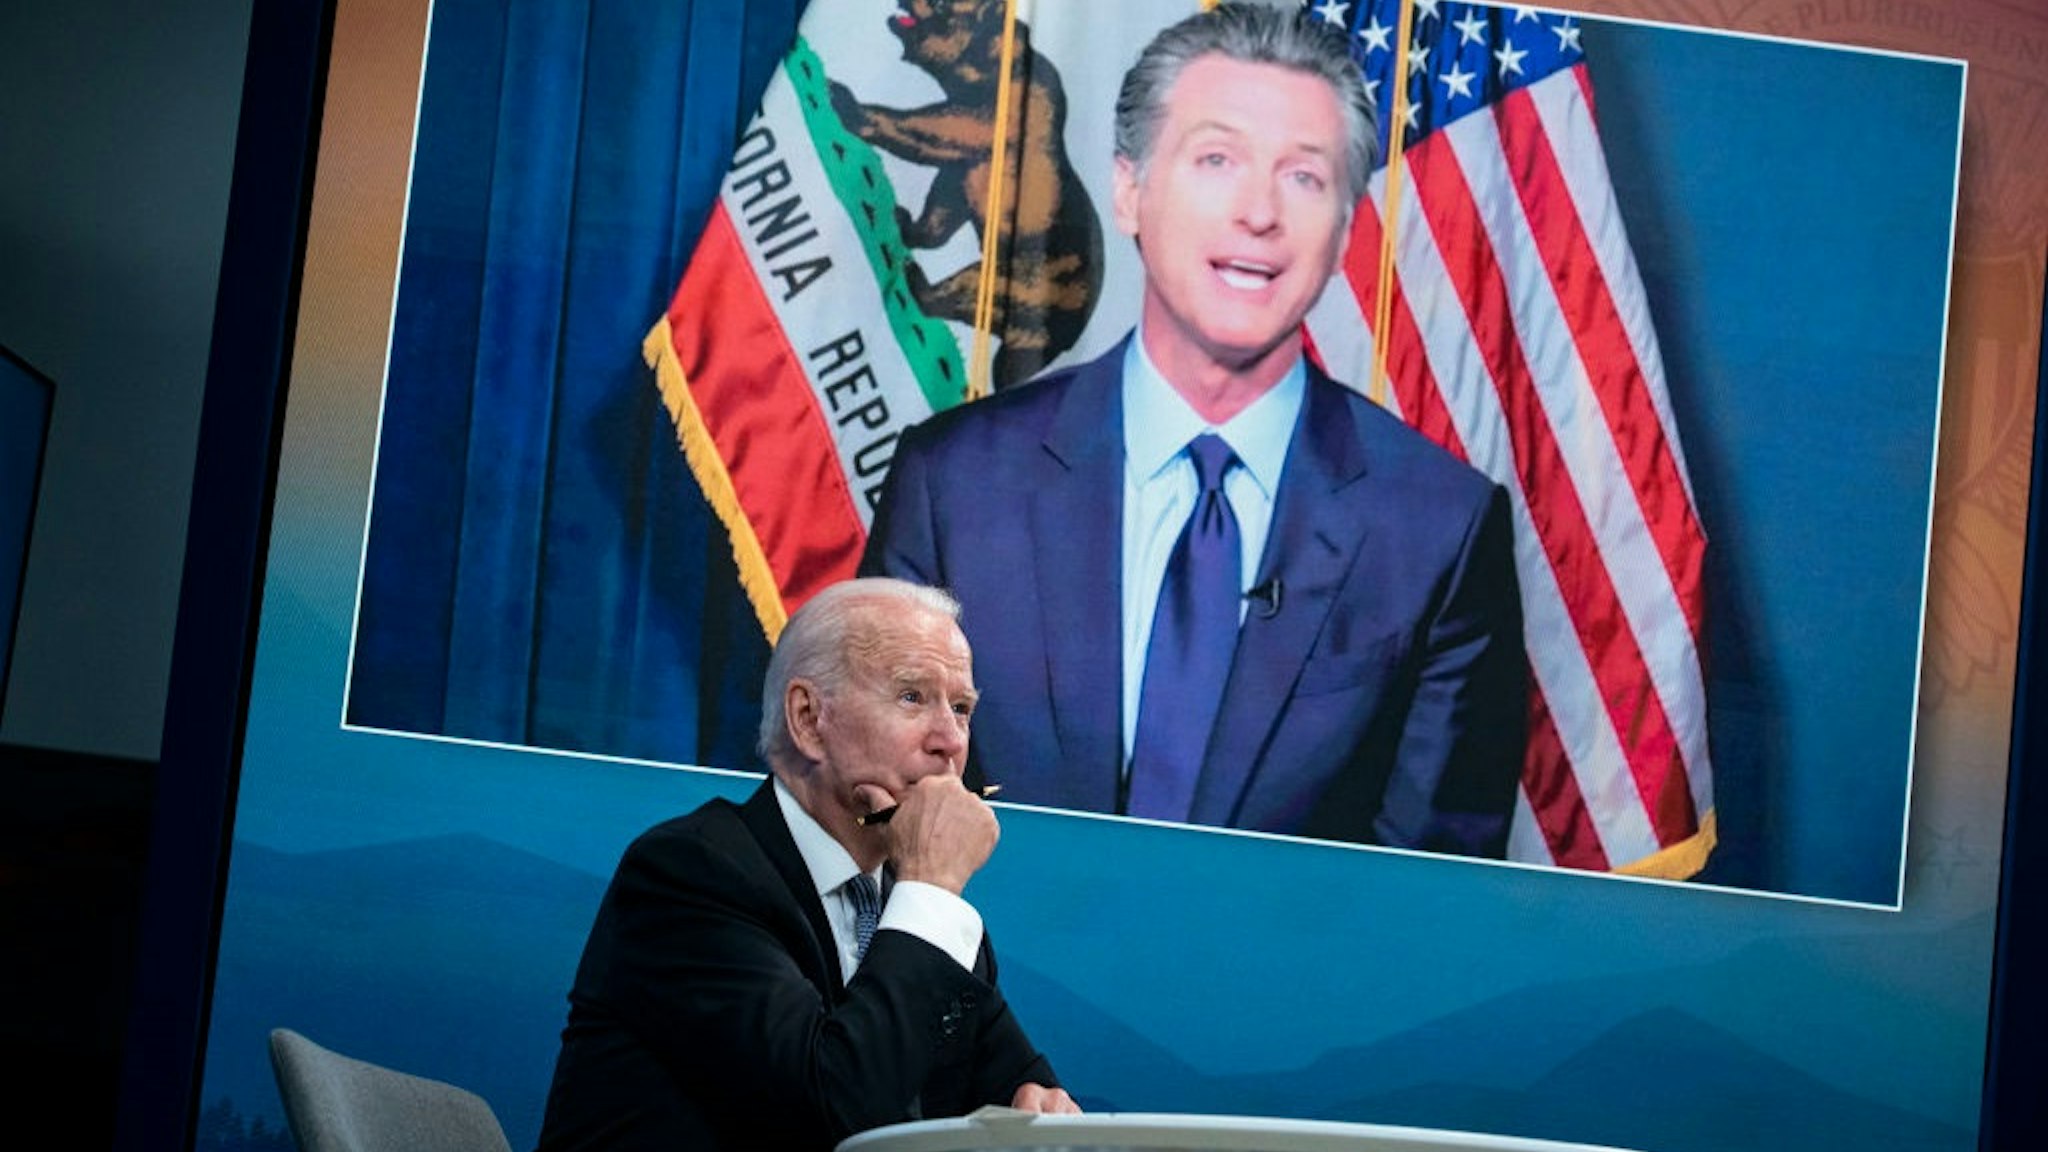 WASHINGTON, DC - JULY 30: President Joe Biden listens as Gavin Newsom, Governor of California, speaks during a meeting on wildfires with Governors and Vice President Kamala Harris, in the South Court Auditorium on the White House complex, on Friday, July 30, 2021 in Washington, DC.